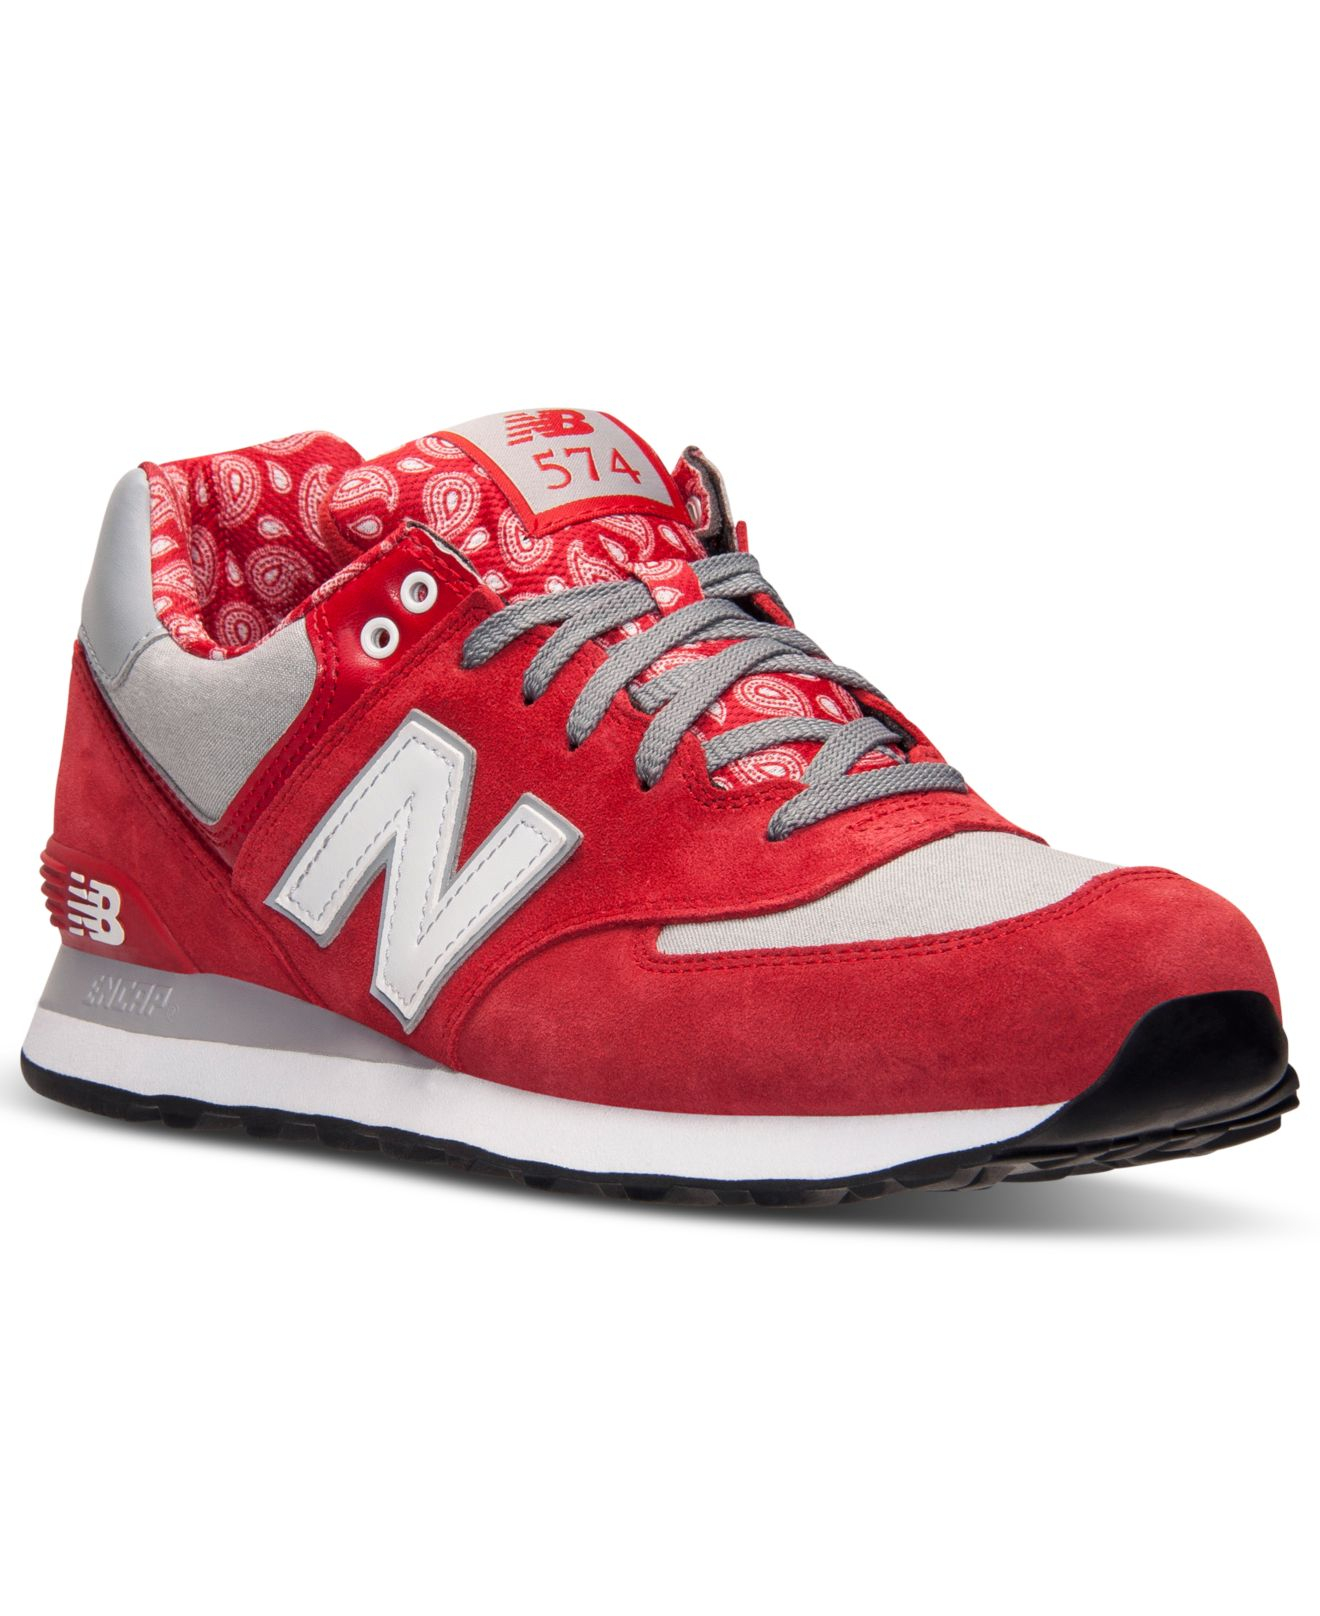 Lyst - New Balance Men's 574 Paisley Casual Sneakers From Finish Line ...